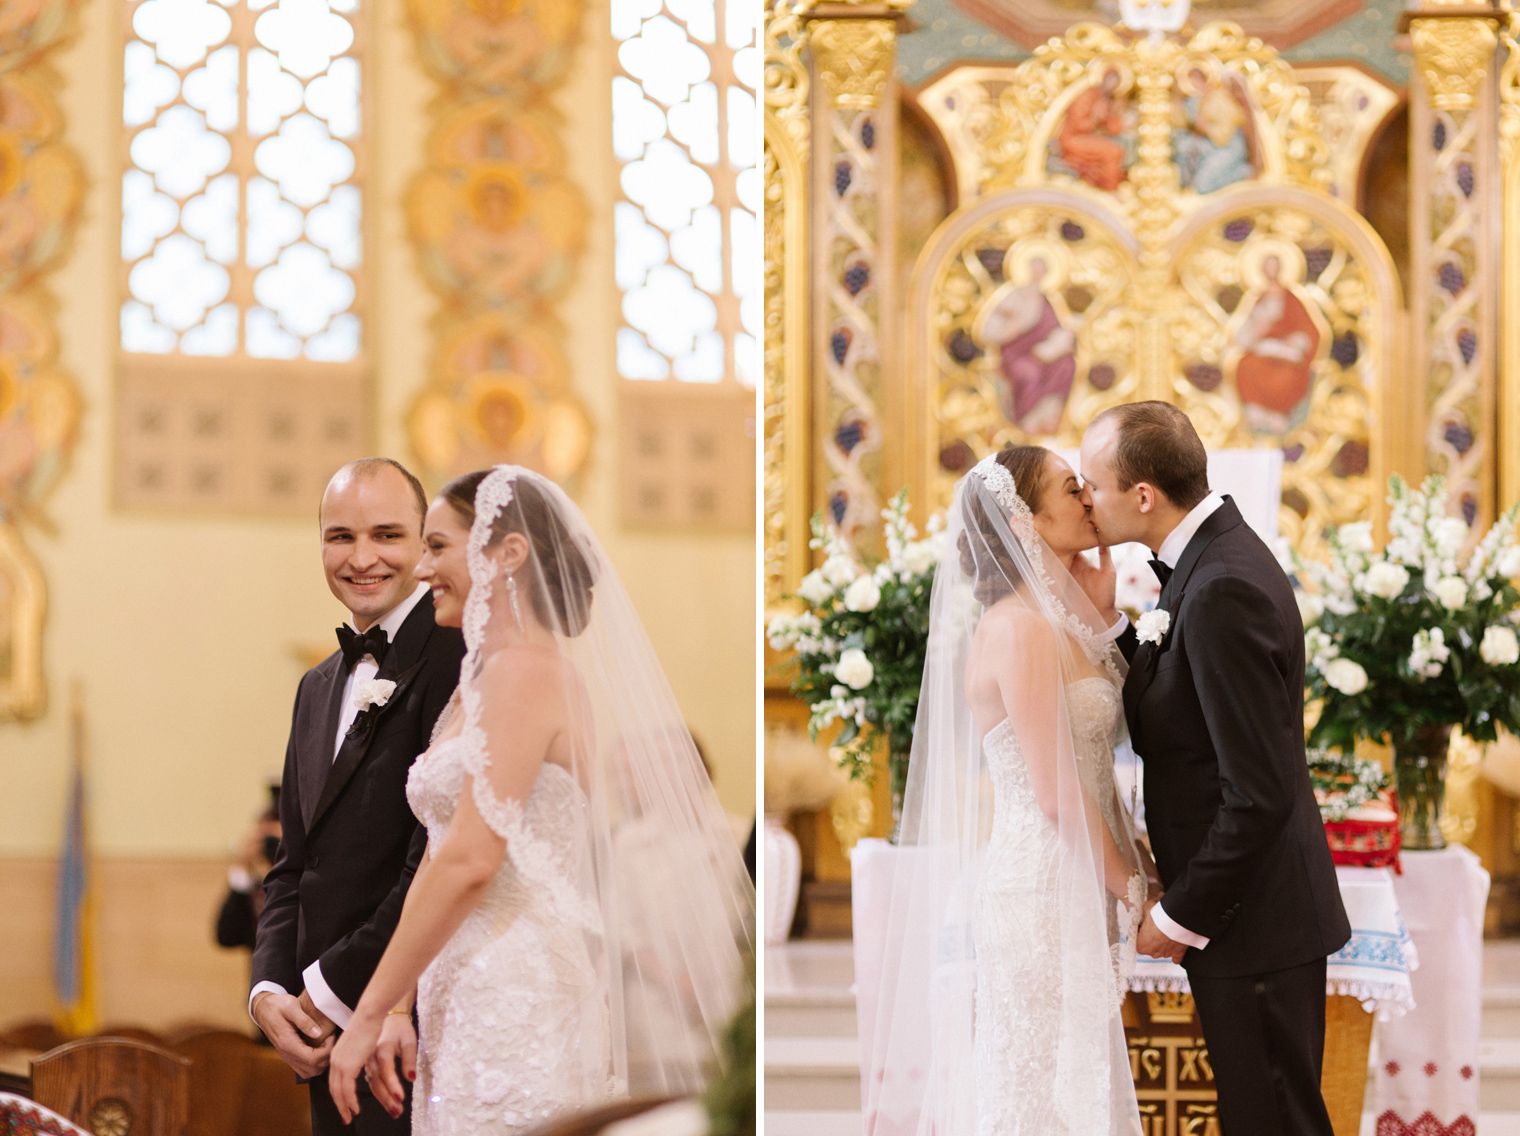 Bride and groom share their first kiss during wedding ceremony at Immaculate Conception Ukrainian Rite Catholic Church in Hamtramck Michigan.